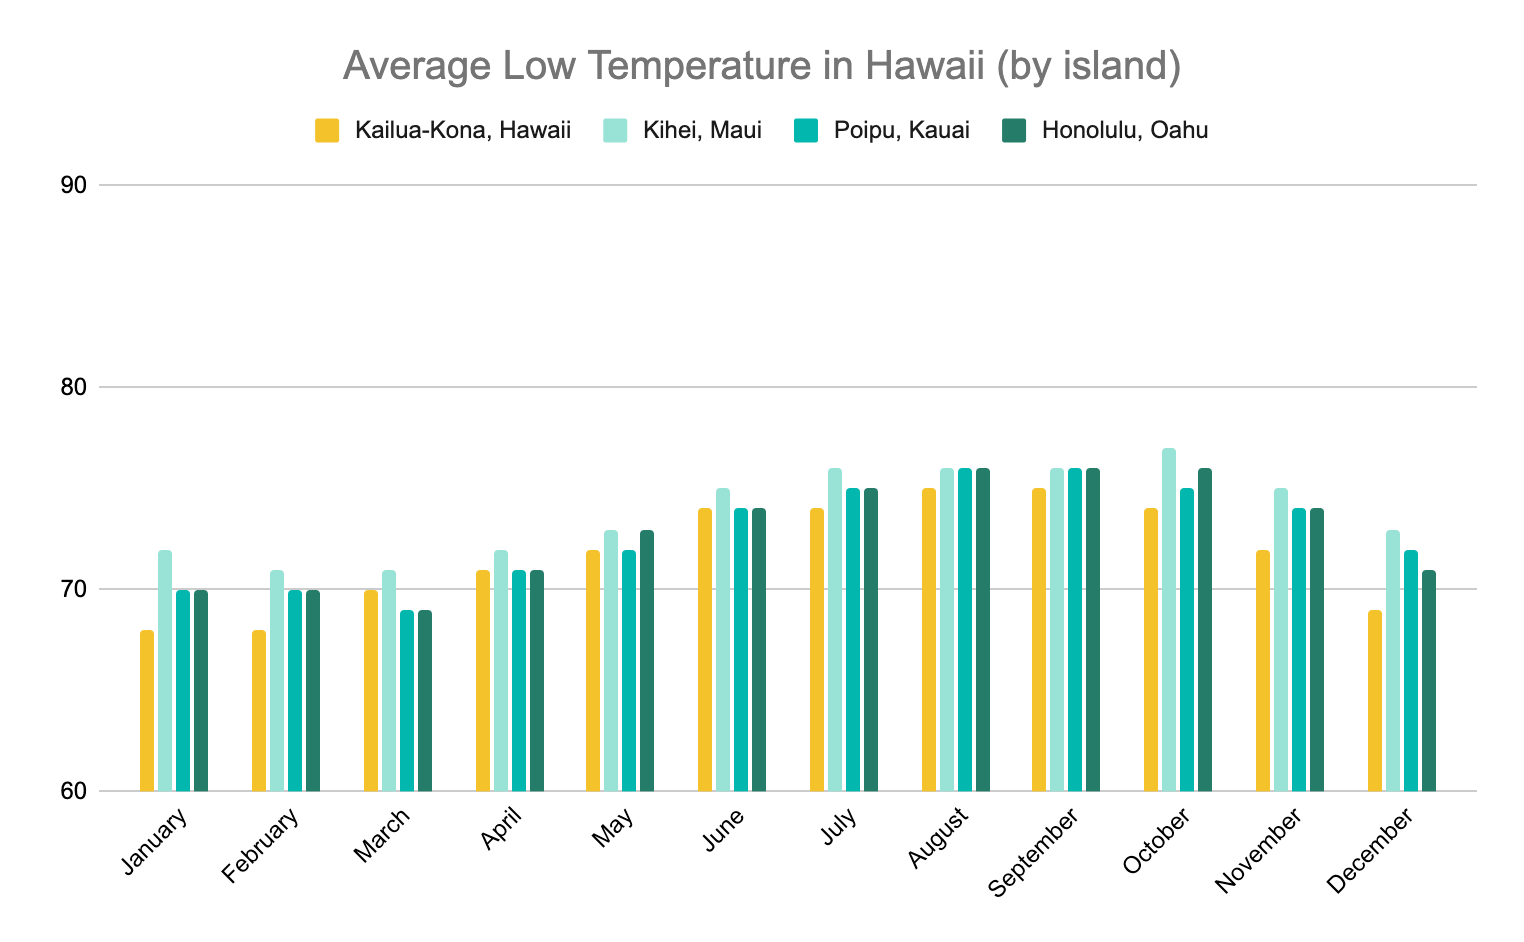 Graph showing the average low temperatures (Fahrenheit) in Hawaii throughout the year by island, with Maui having the smallest change from the high temperatures and the Big Island having the biggest change.